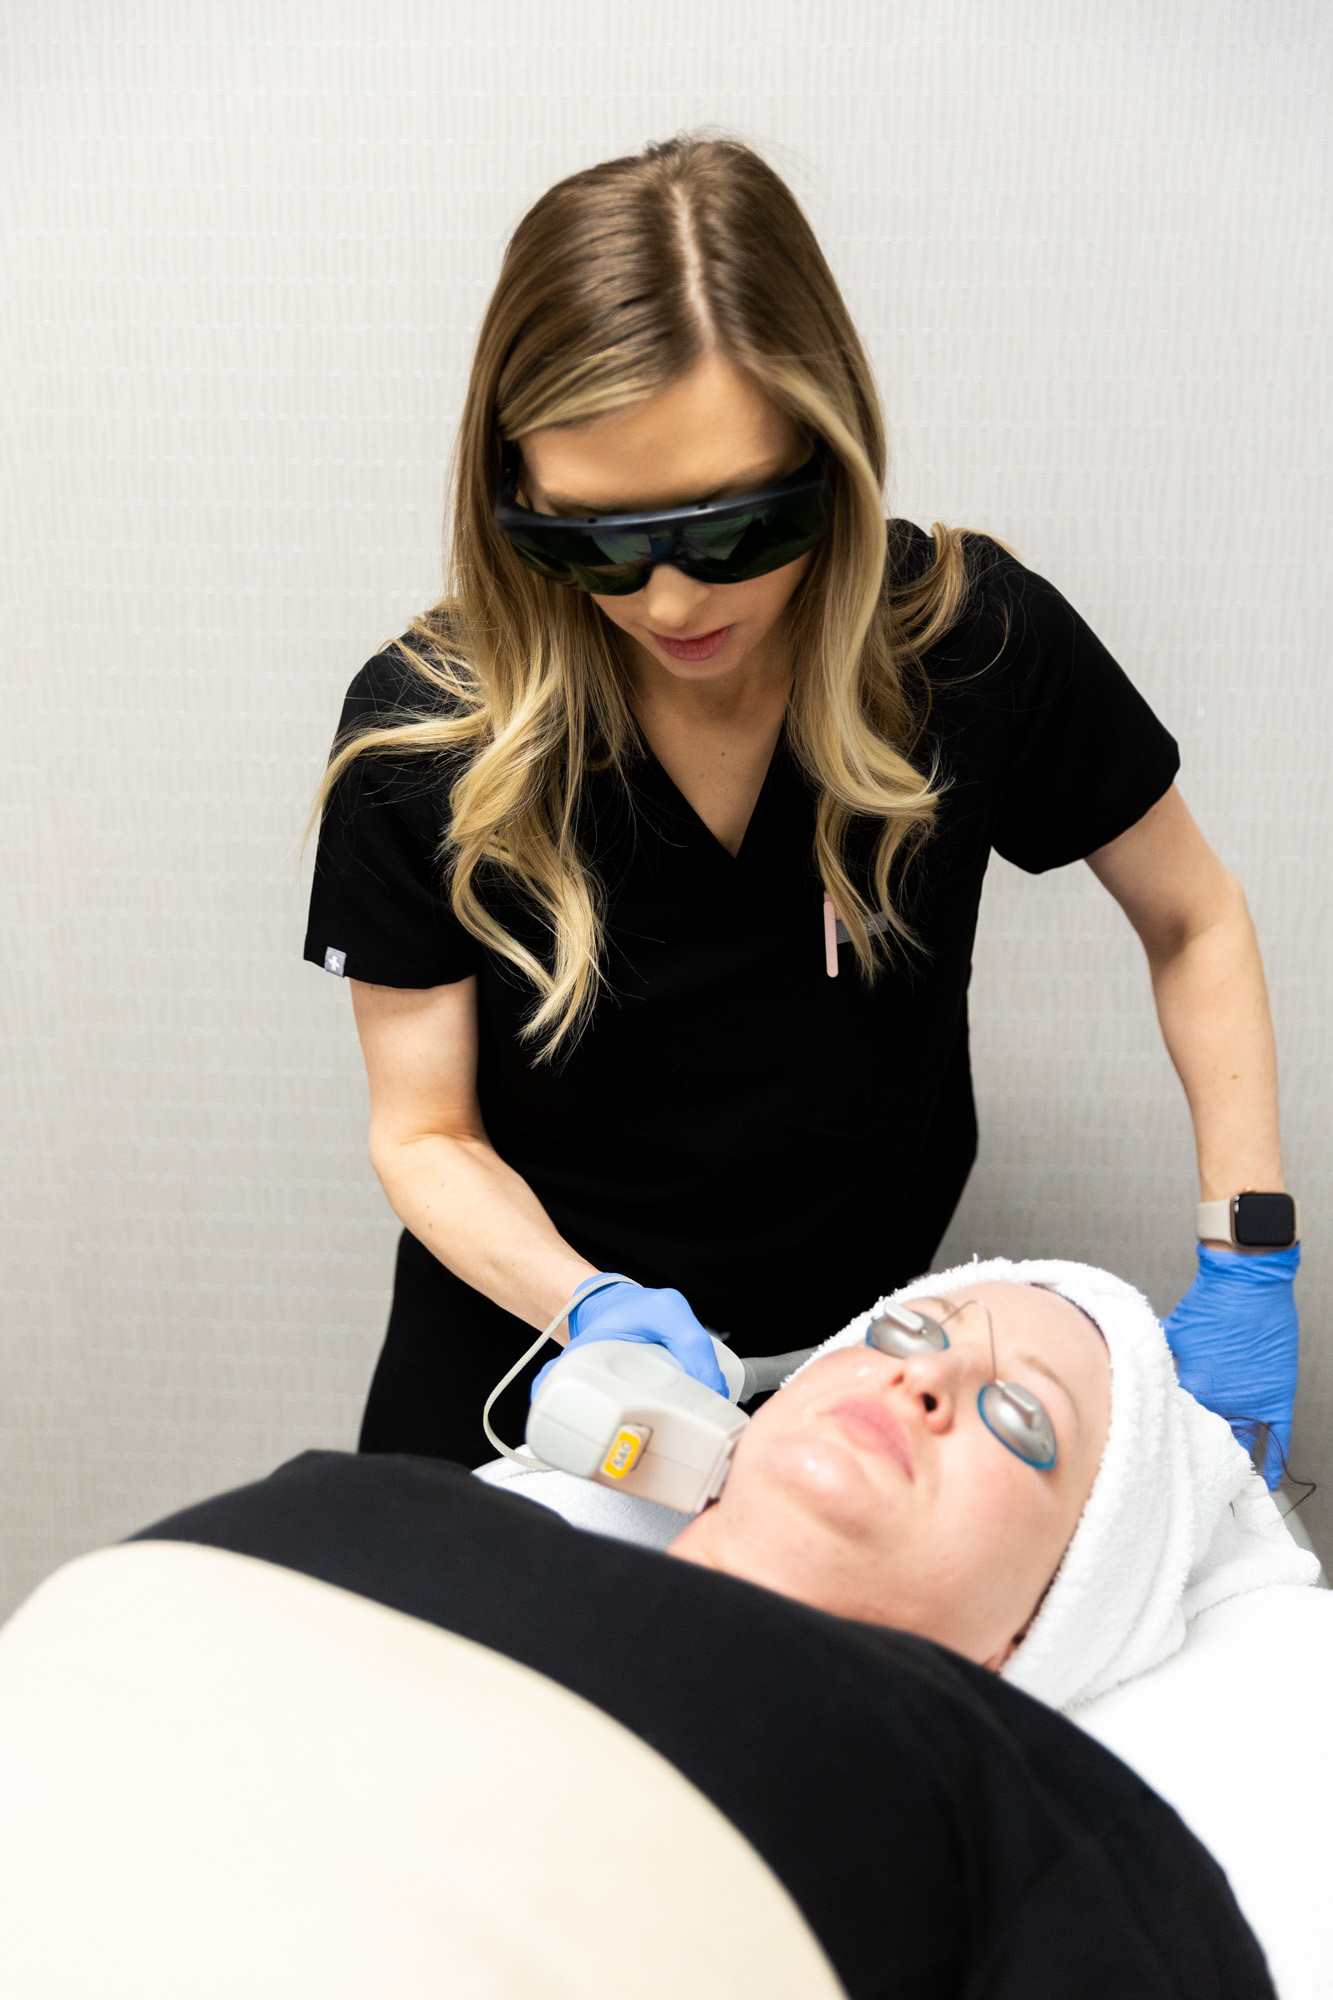 Female client is receiving facial treatment from Kansas City Skin and Cancer Center professional. Her face is covered in thin layer of clear gel and she is wearing protective eye coverings. Aesthetician is visible in this shot.